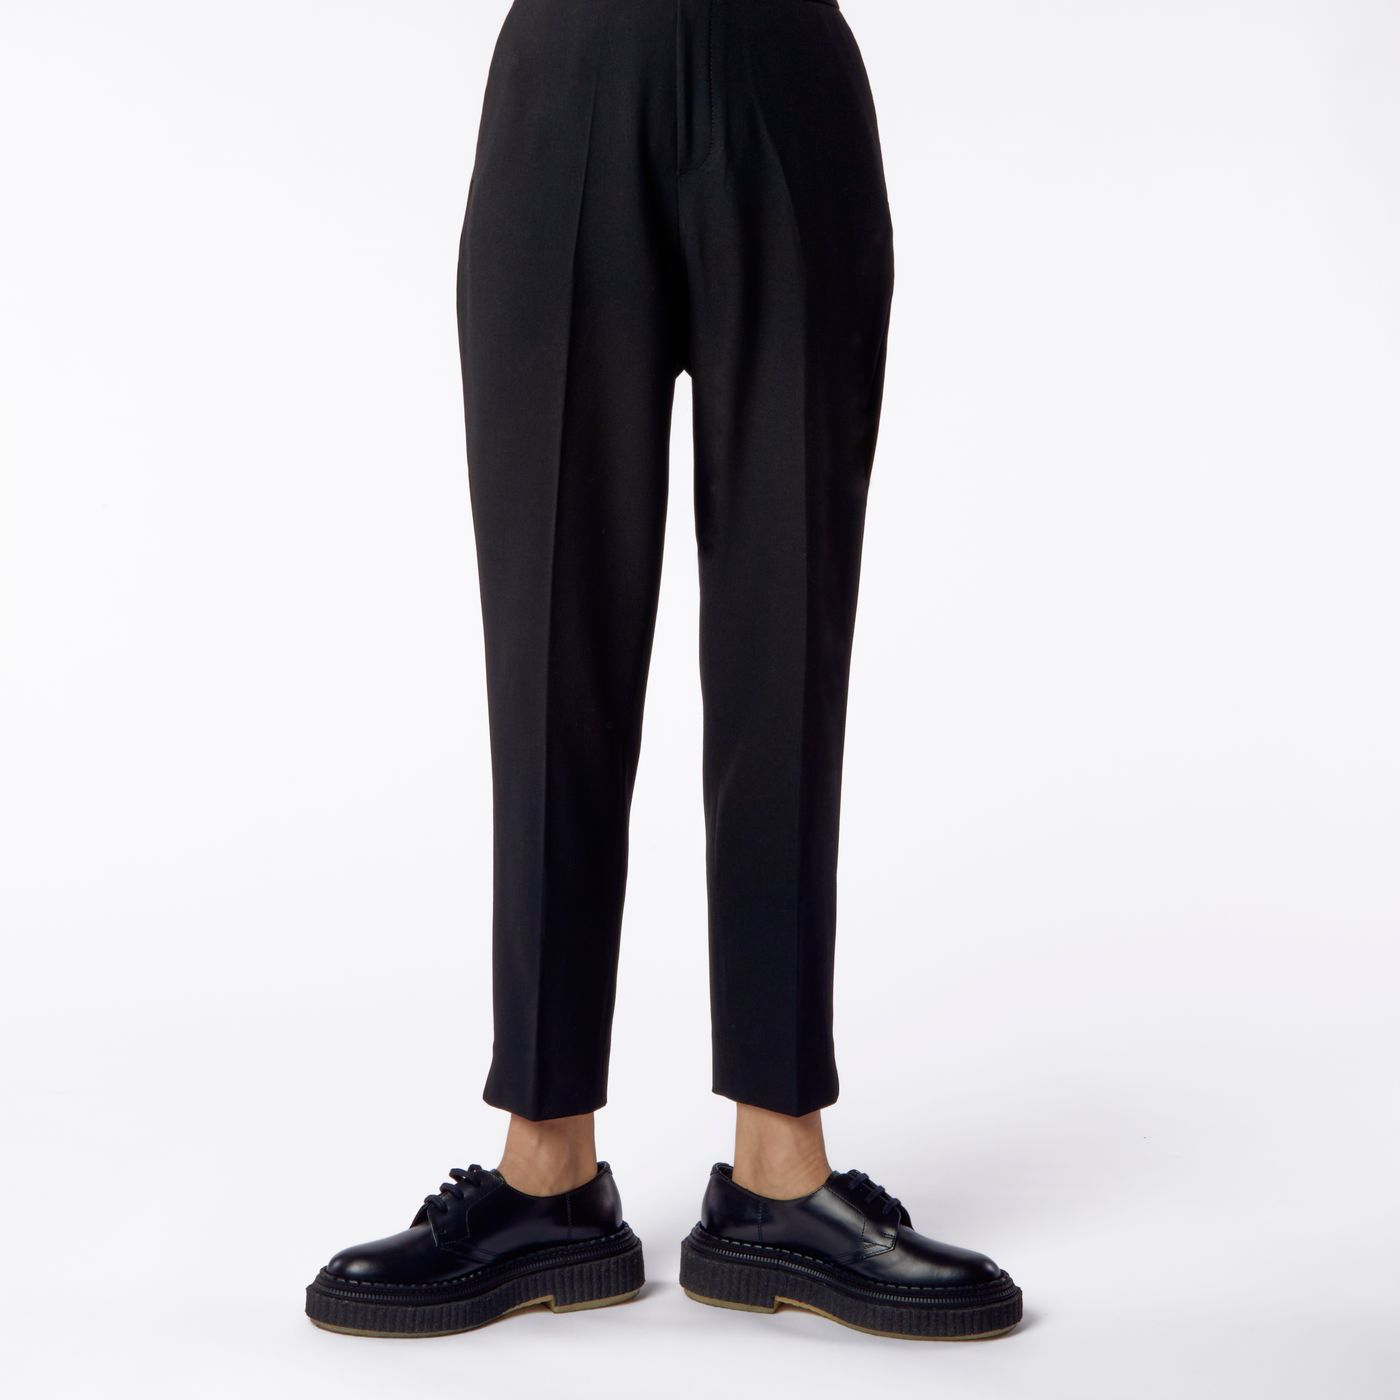 Buy Gap Skinny Cropped Work Trouser from the Gap online shop